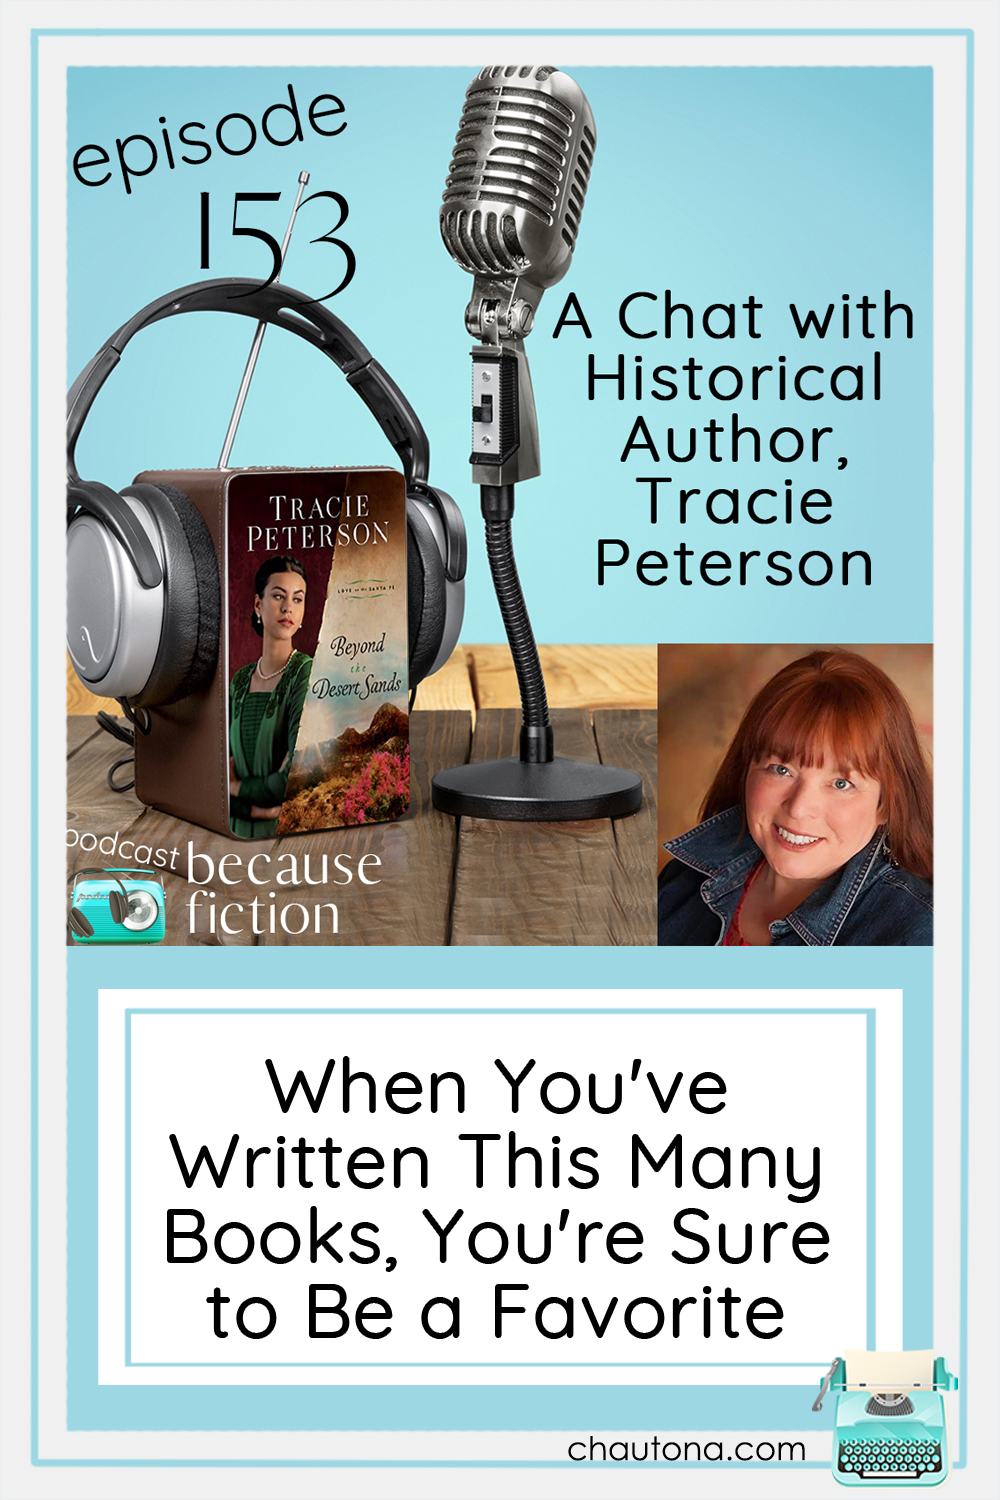 Listen in to find out about Tracie Peterson and her latest (and upcoming) releases in the Love on the Santa Fe series! via @chautonahavig